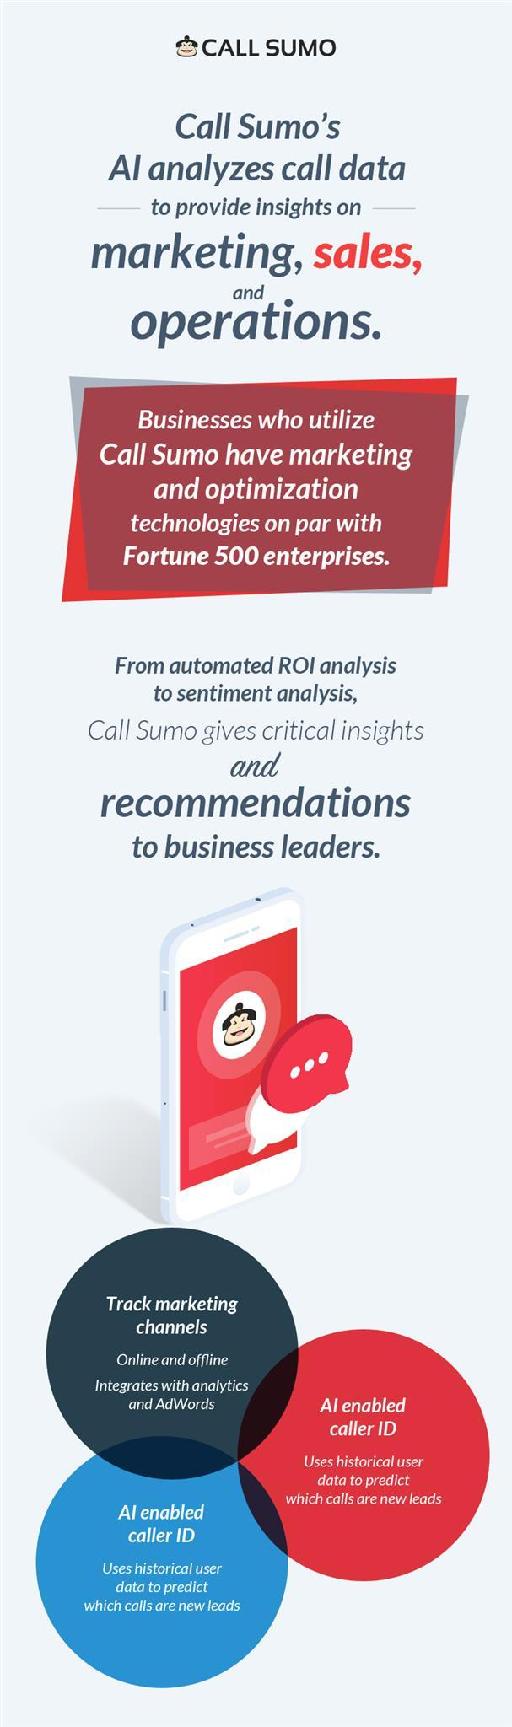 Get Better Insights on Marketing, Sales, and Operations with Call Sumo』s AI